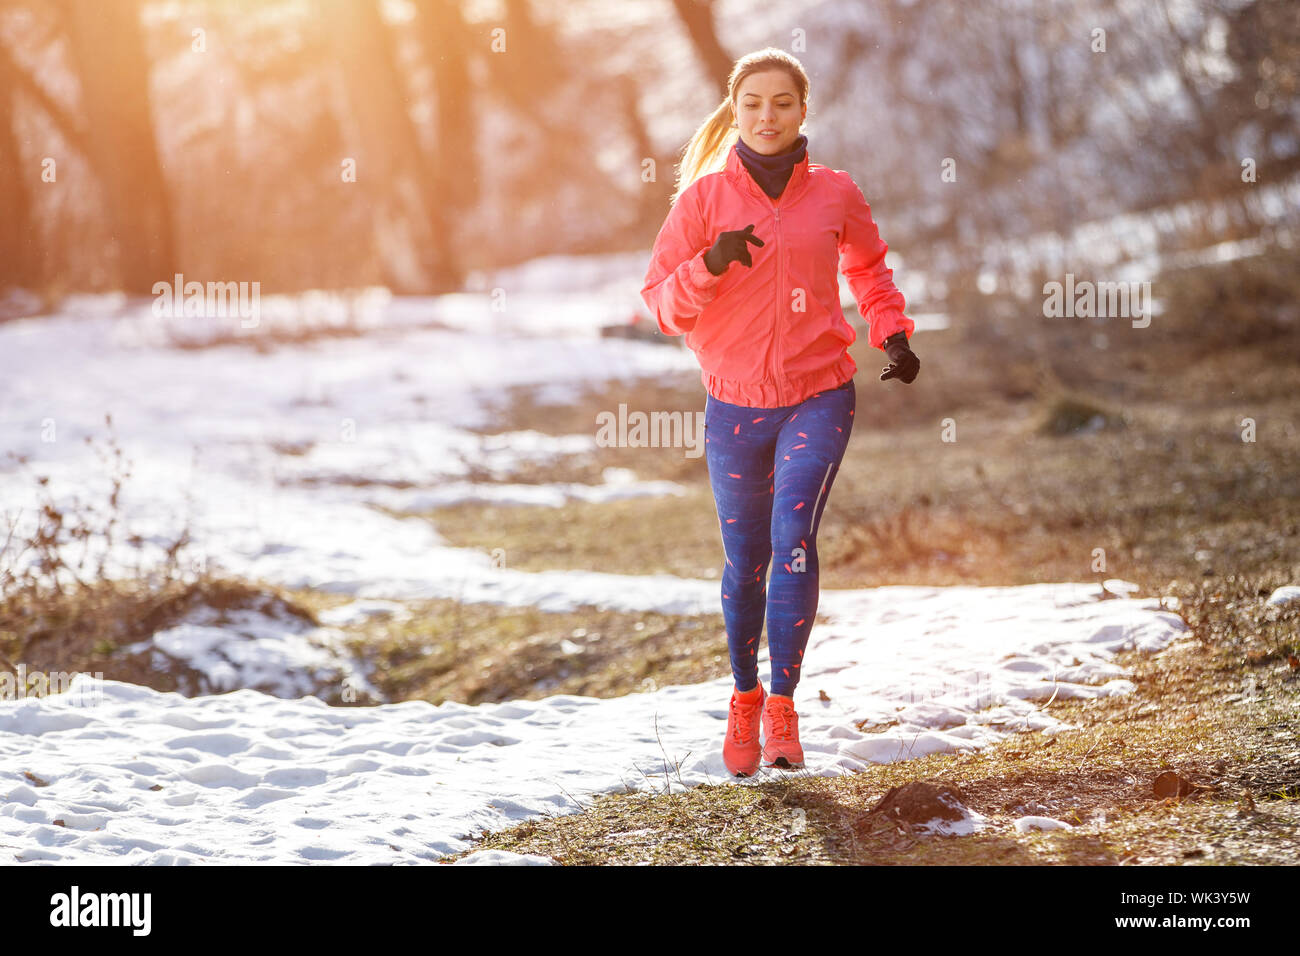 Young slim woman jogging in winter park. Smiling girl running in cold weather Stock Photo